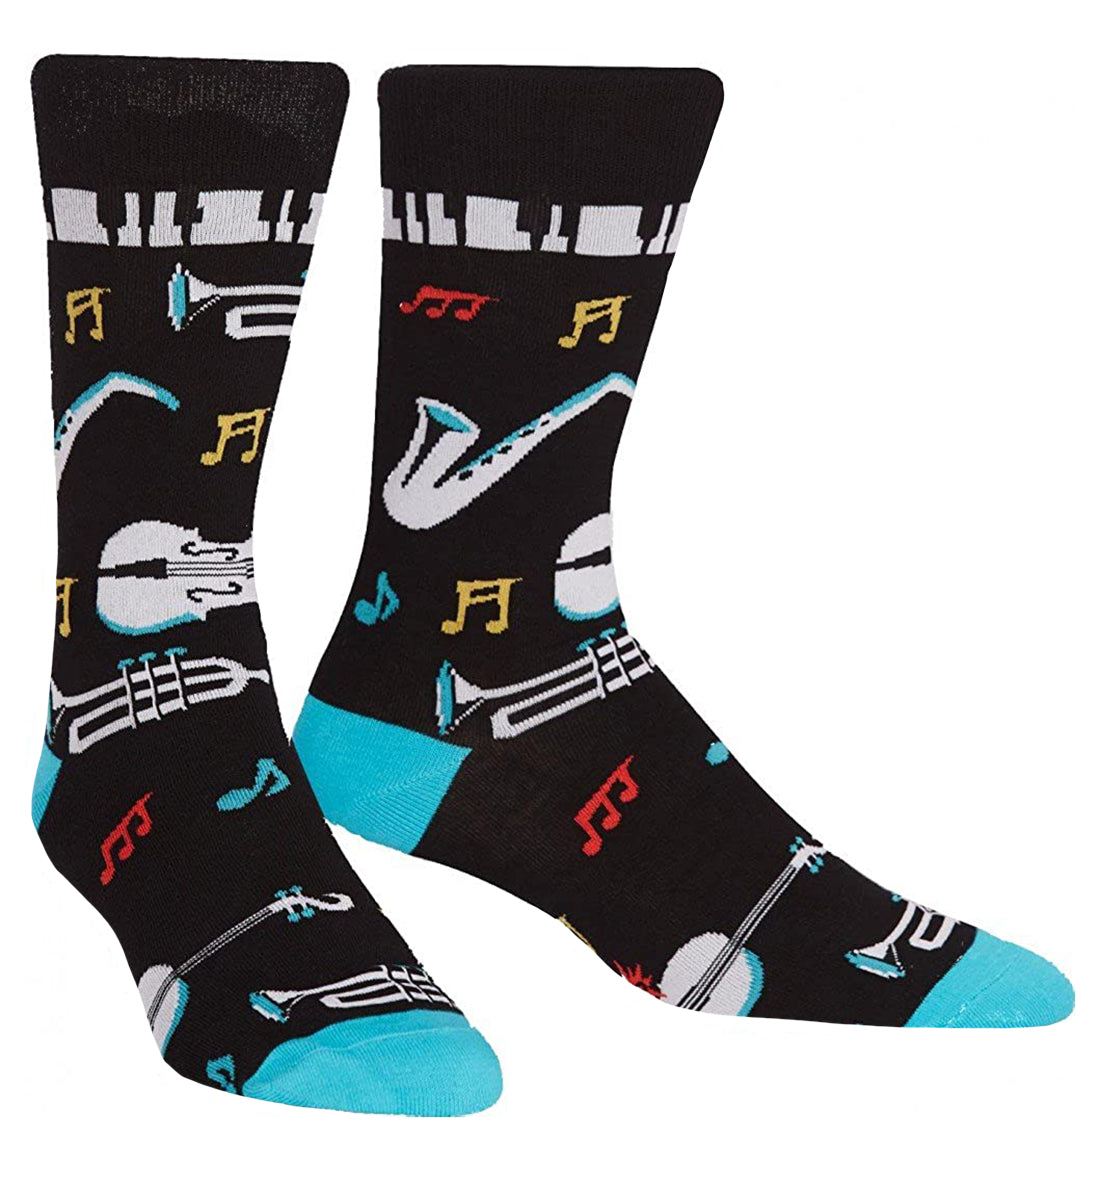 SOCK it to me Men&#39;s Crew Socks (mef0282),All That Jazz - All That Jazz,One Size